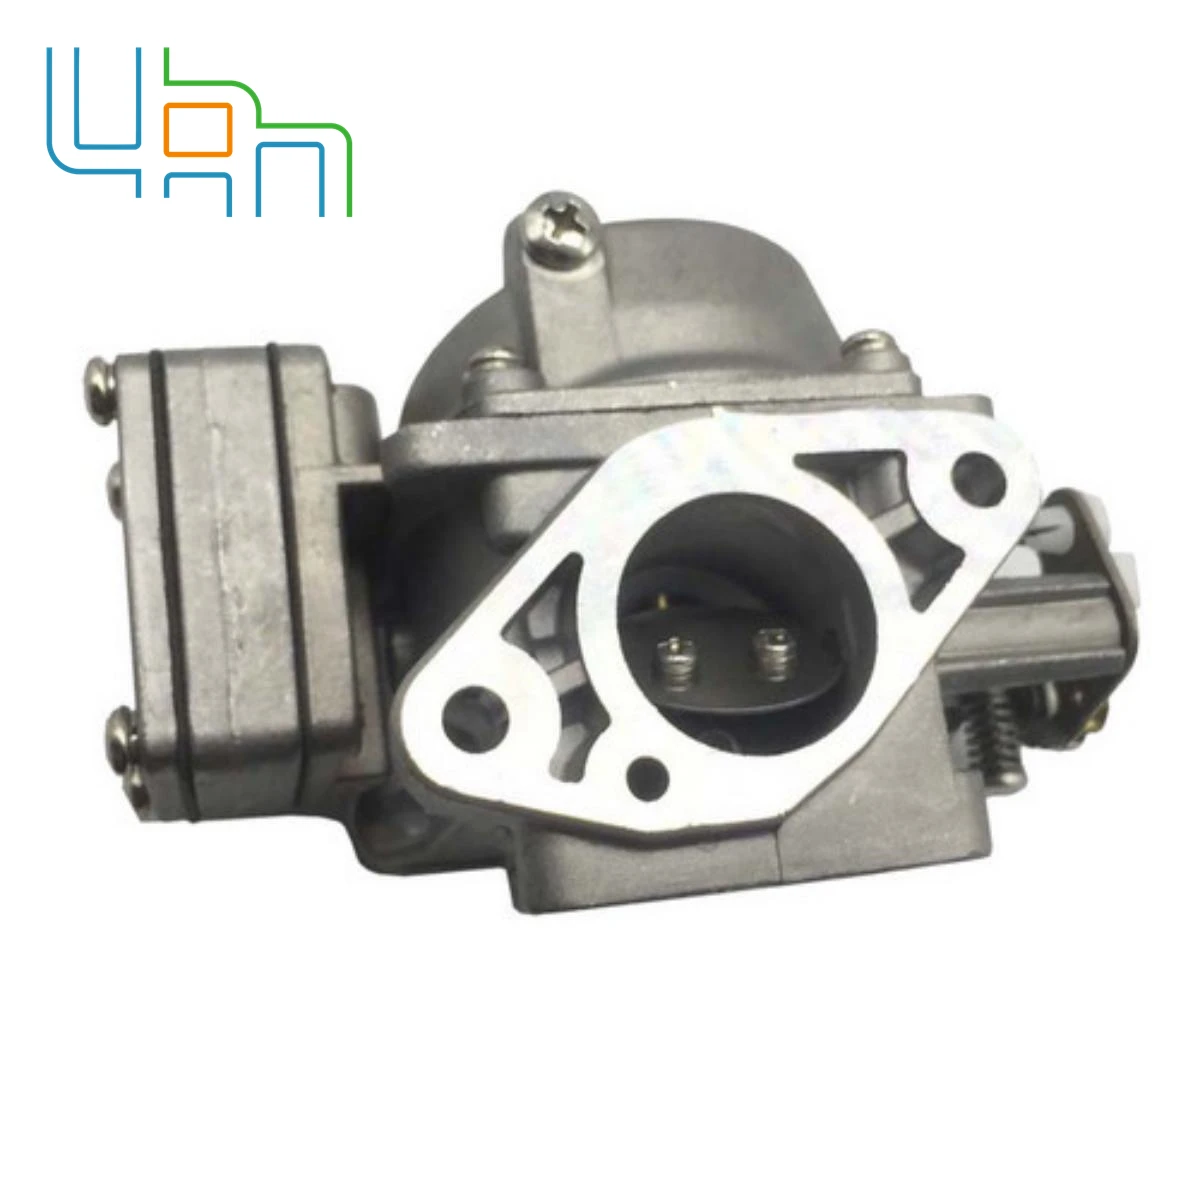 369-03200-2 Carburetor For Tohatsu Nissan 2 Strokes 5HP M5B M5BS Outboard Engine  369-03200-0 369-03200-2 36903-2002M